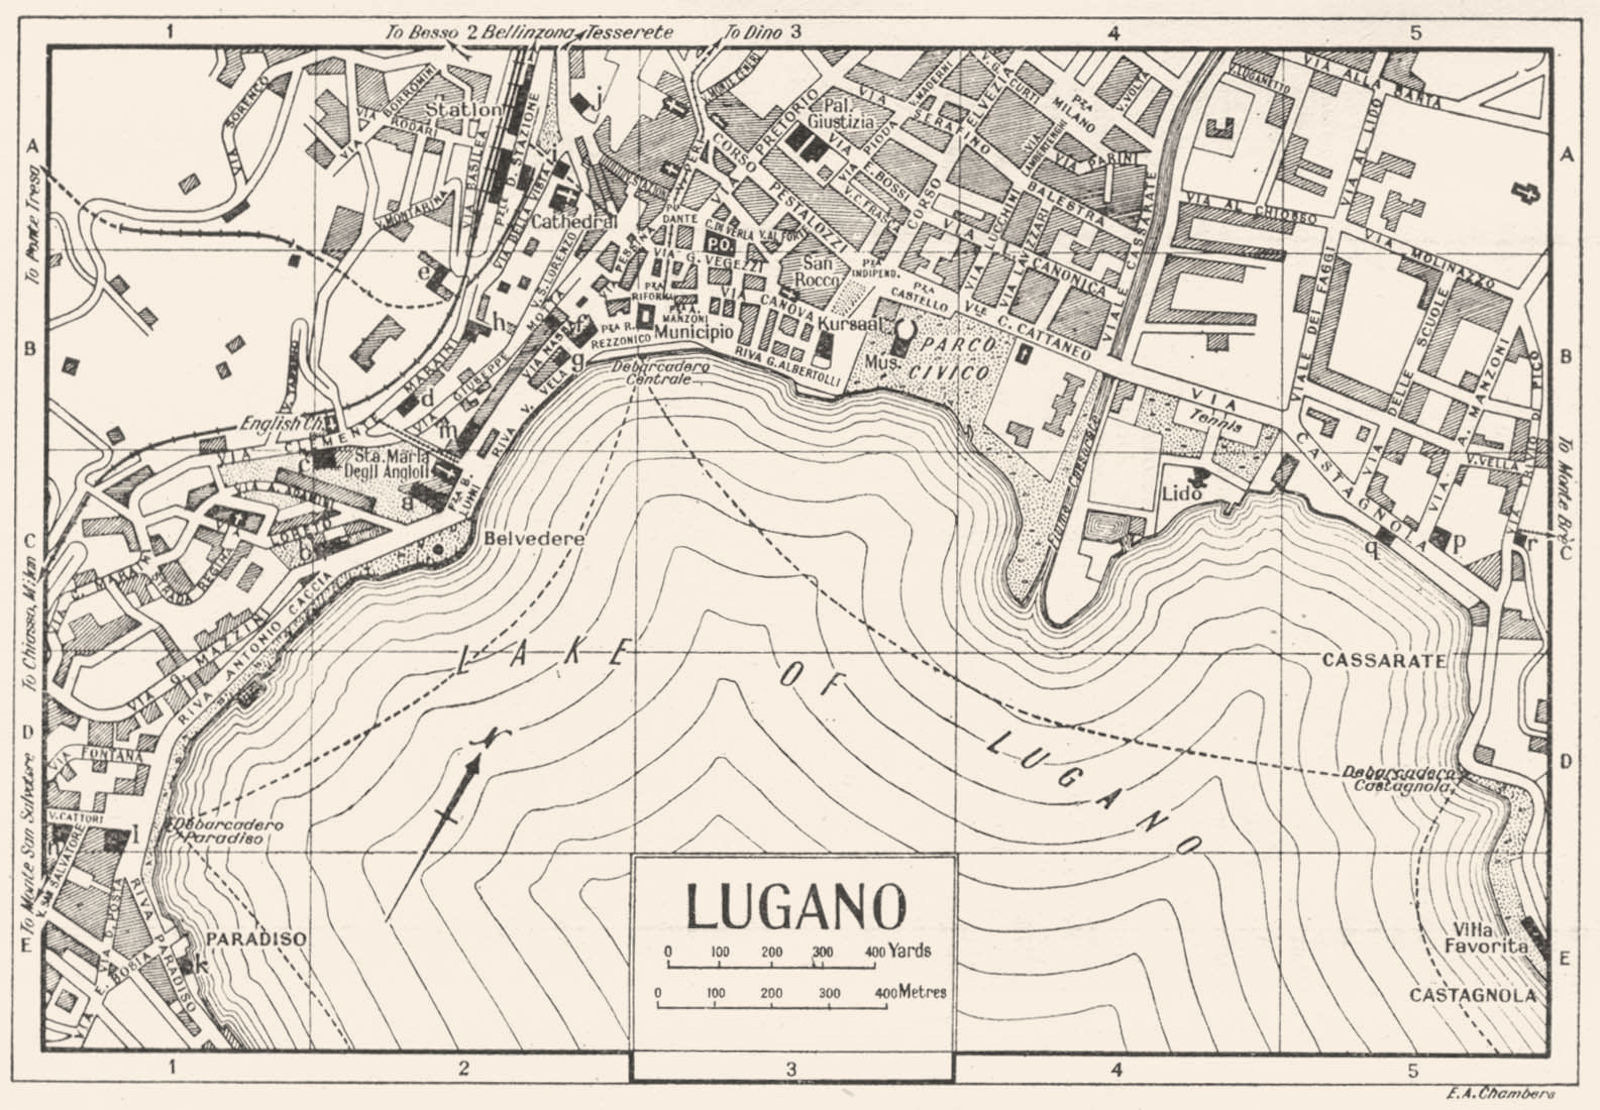 Associate Product LUGANO town/city plan. Italy 1953 old vintage map chart